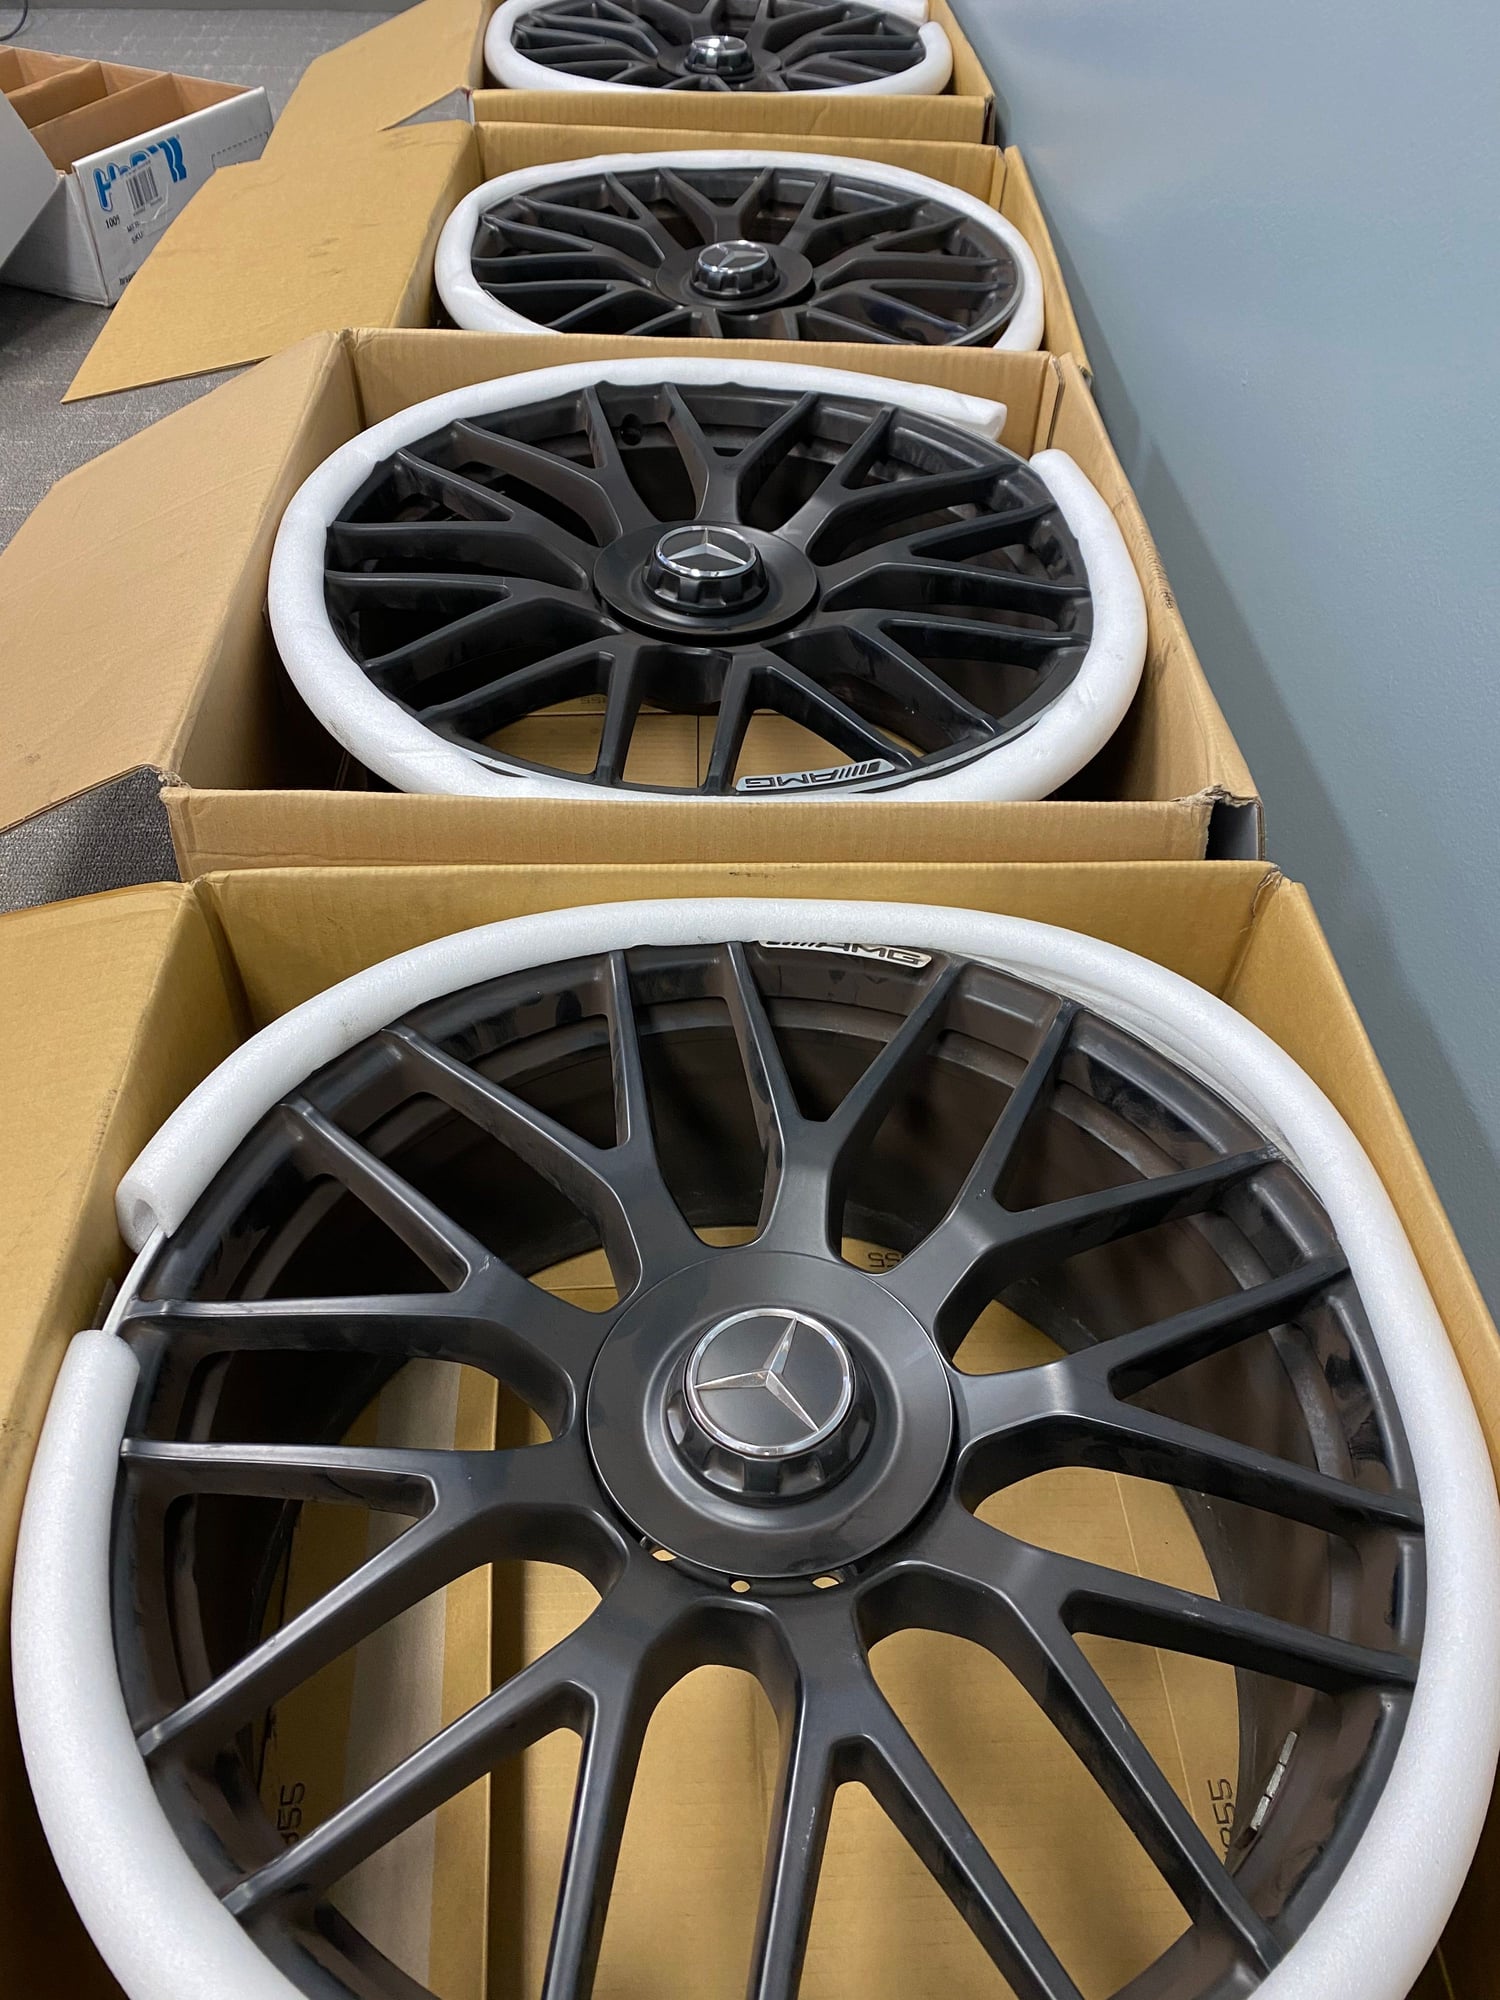 Wheels and Tires/Axles - 19" C63s MERCEDES OEM AMG Factory C63 Rims (Set of 4) staggered - Used - All Years Mercedes-Benz C63 AMG - Irvine, CA 92618, United States